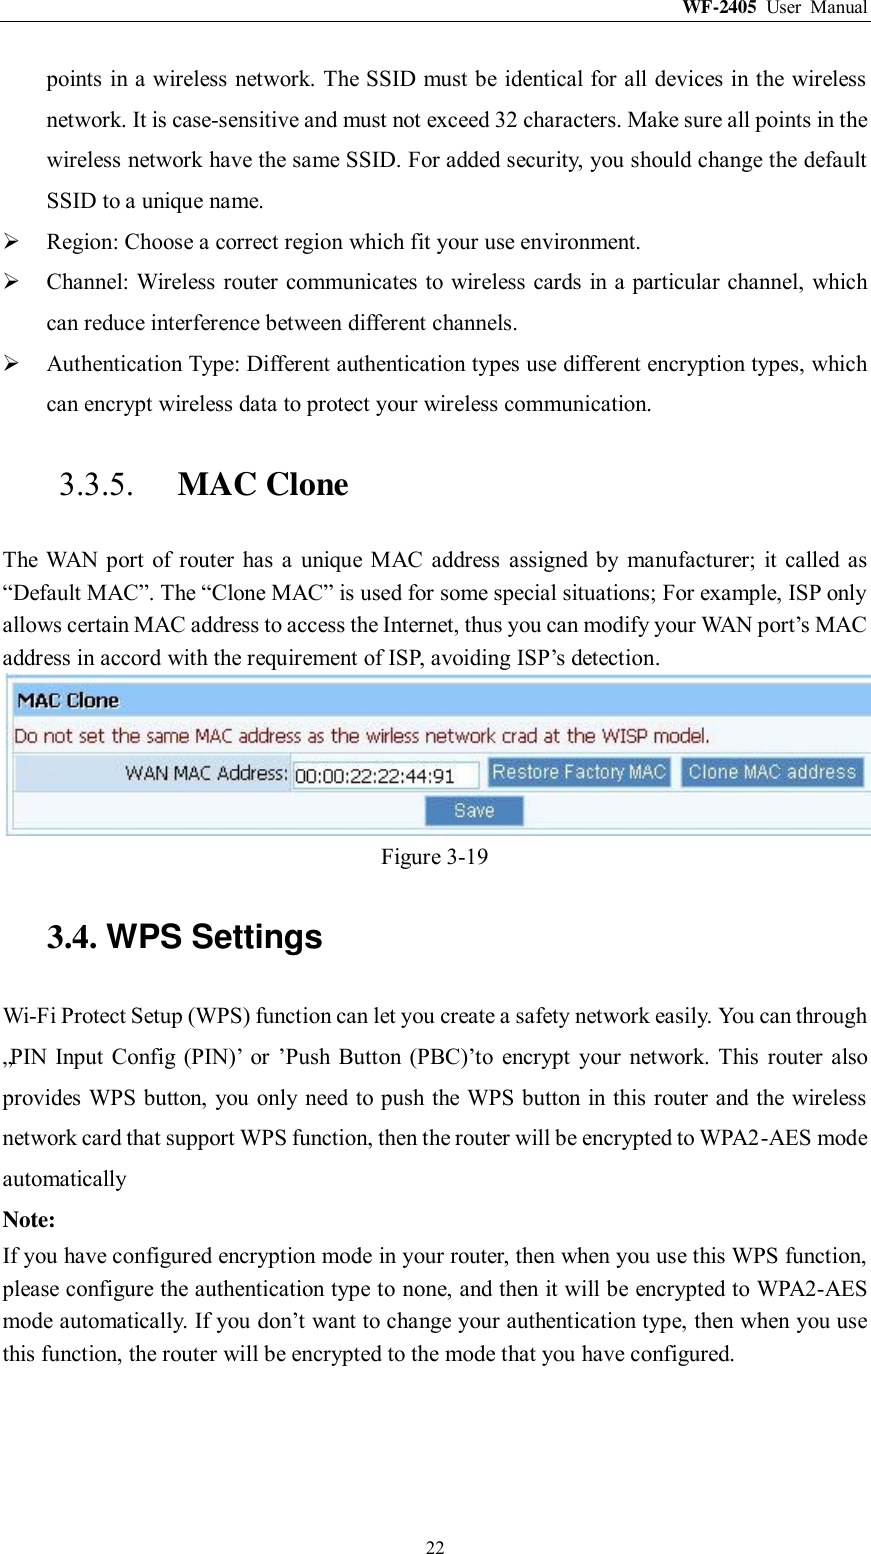 WF-2405  User  Manual  22 points in a wireless network. The SSID must be identical for all devices in the wireless network. It is case-sensitive and must not exceed 32 characters. Make sure all points in the wireless network have the same SSID. For added security, you should change the default SSID to a unique name.  Region: Choose a correct region which fit your use environment.  Channel: Wireless router communicates to wireless cards in a particular channel, which can reduce interference between different channels.  Authentication Type: Different authentication types use different encryption types, which can encrypt wireless data to protect your wireless communication. 3.3.5. MAC Clone The  WAN  port  of router  has  a  unique MAC address  assigned  by  manufacturer;  it  called as “Default MAC”. The “Clone MAC” is used for some special situations; For example, ISP only allows certain MAC address to access the Internet, thus you can modify your WAN port‟s MAC address in accord with the requirement of ISP, avoiding ISP‟s detection.  Figure 3-19 3.4. WPS Settings Wi-Fi Protect Setup (WPS) function can let you create a safety network easily. You can through „PIN Input Config (PIN)‟  or  ‟Push Button  (PBC)‟to  encrypt  your network.  This  router  also provides WPS button, you only need to push the WPS button  in this router and the wireless network card that support WPS function, then the router will be encrypted to WPA2-AES mode automatically Note: If you have configured encryption mode in your router, then when you use this WPS function, please configure the authentication type to none, and then it will be encrypted to WPA2-AES mode automatically. If you don‟t want to change your authentication type, then when you use this function, the router will be encrypted to the mode that you have configured. 